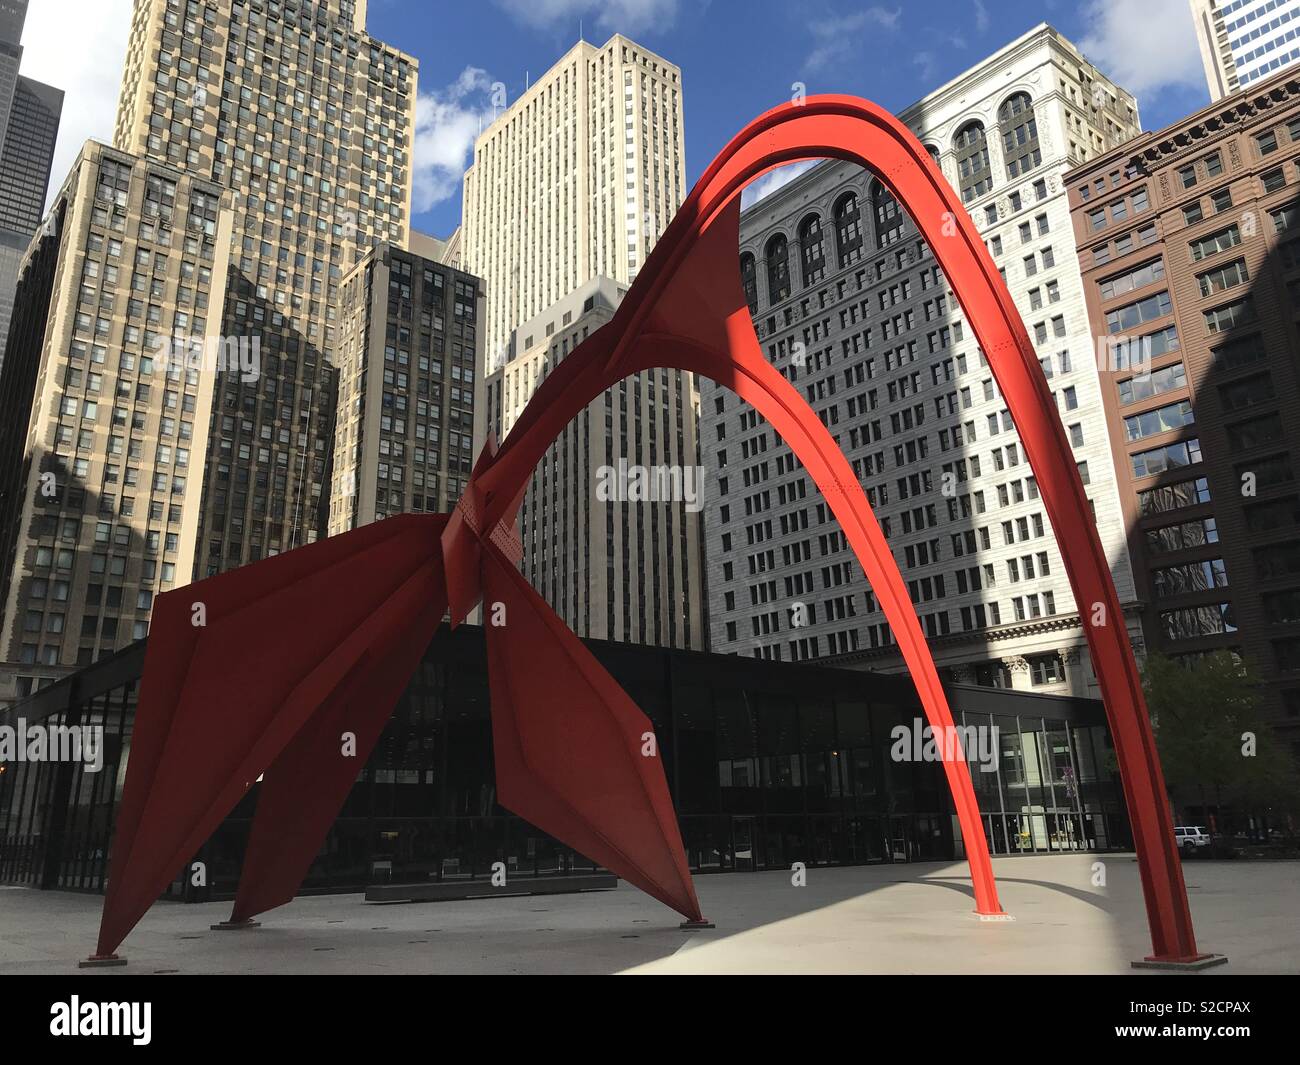 Alexander Calder’s monumental sculpture Flamingo in downtown Chicago (The Loop) Stock Photo